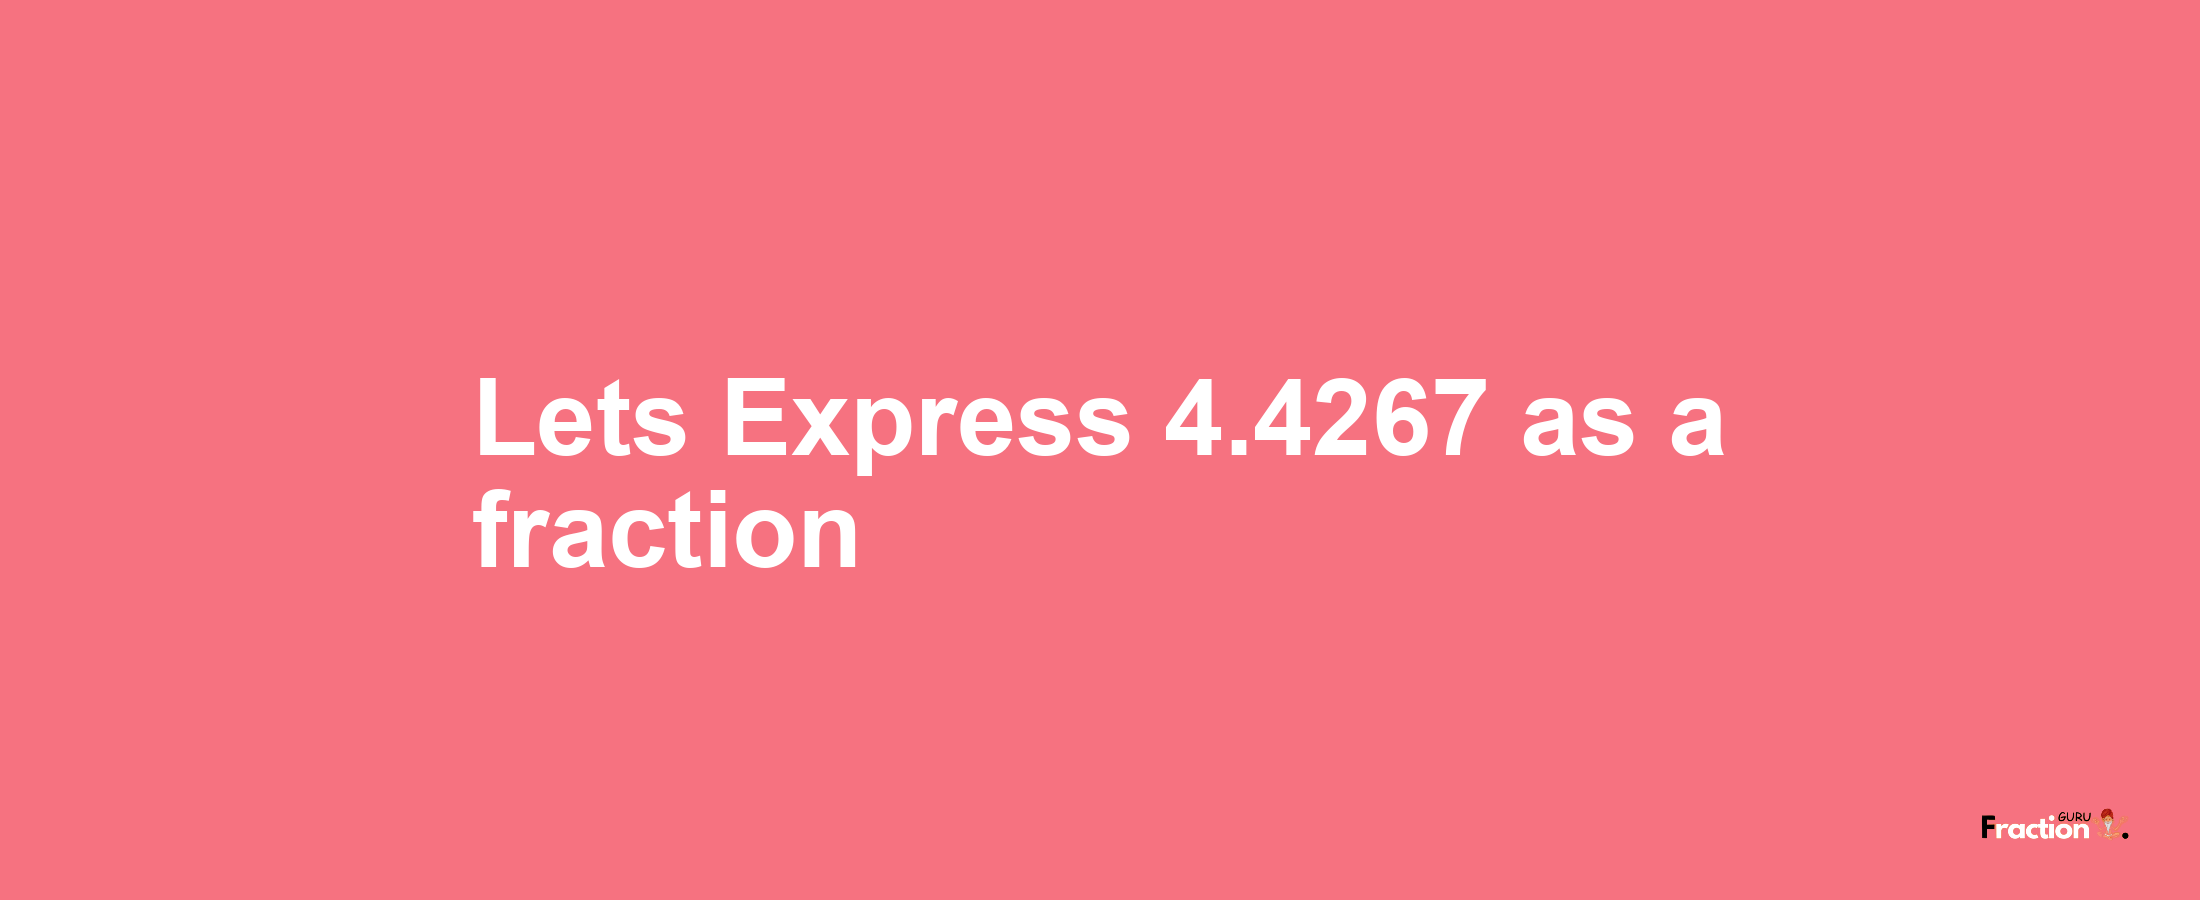 Lets Express 4.4267 as afraction